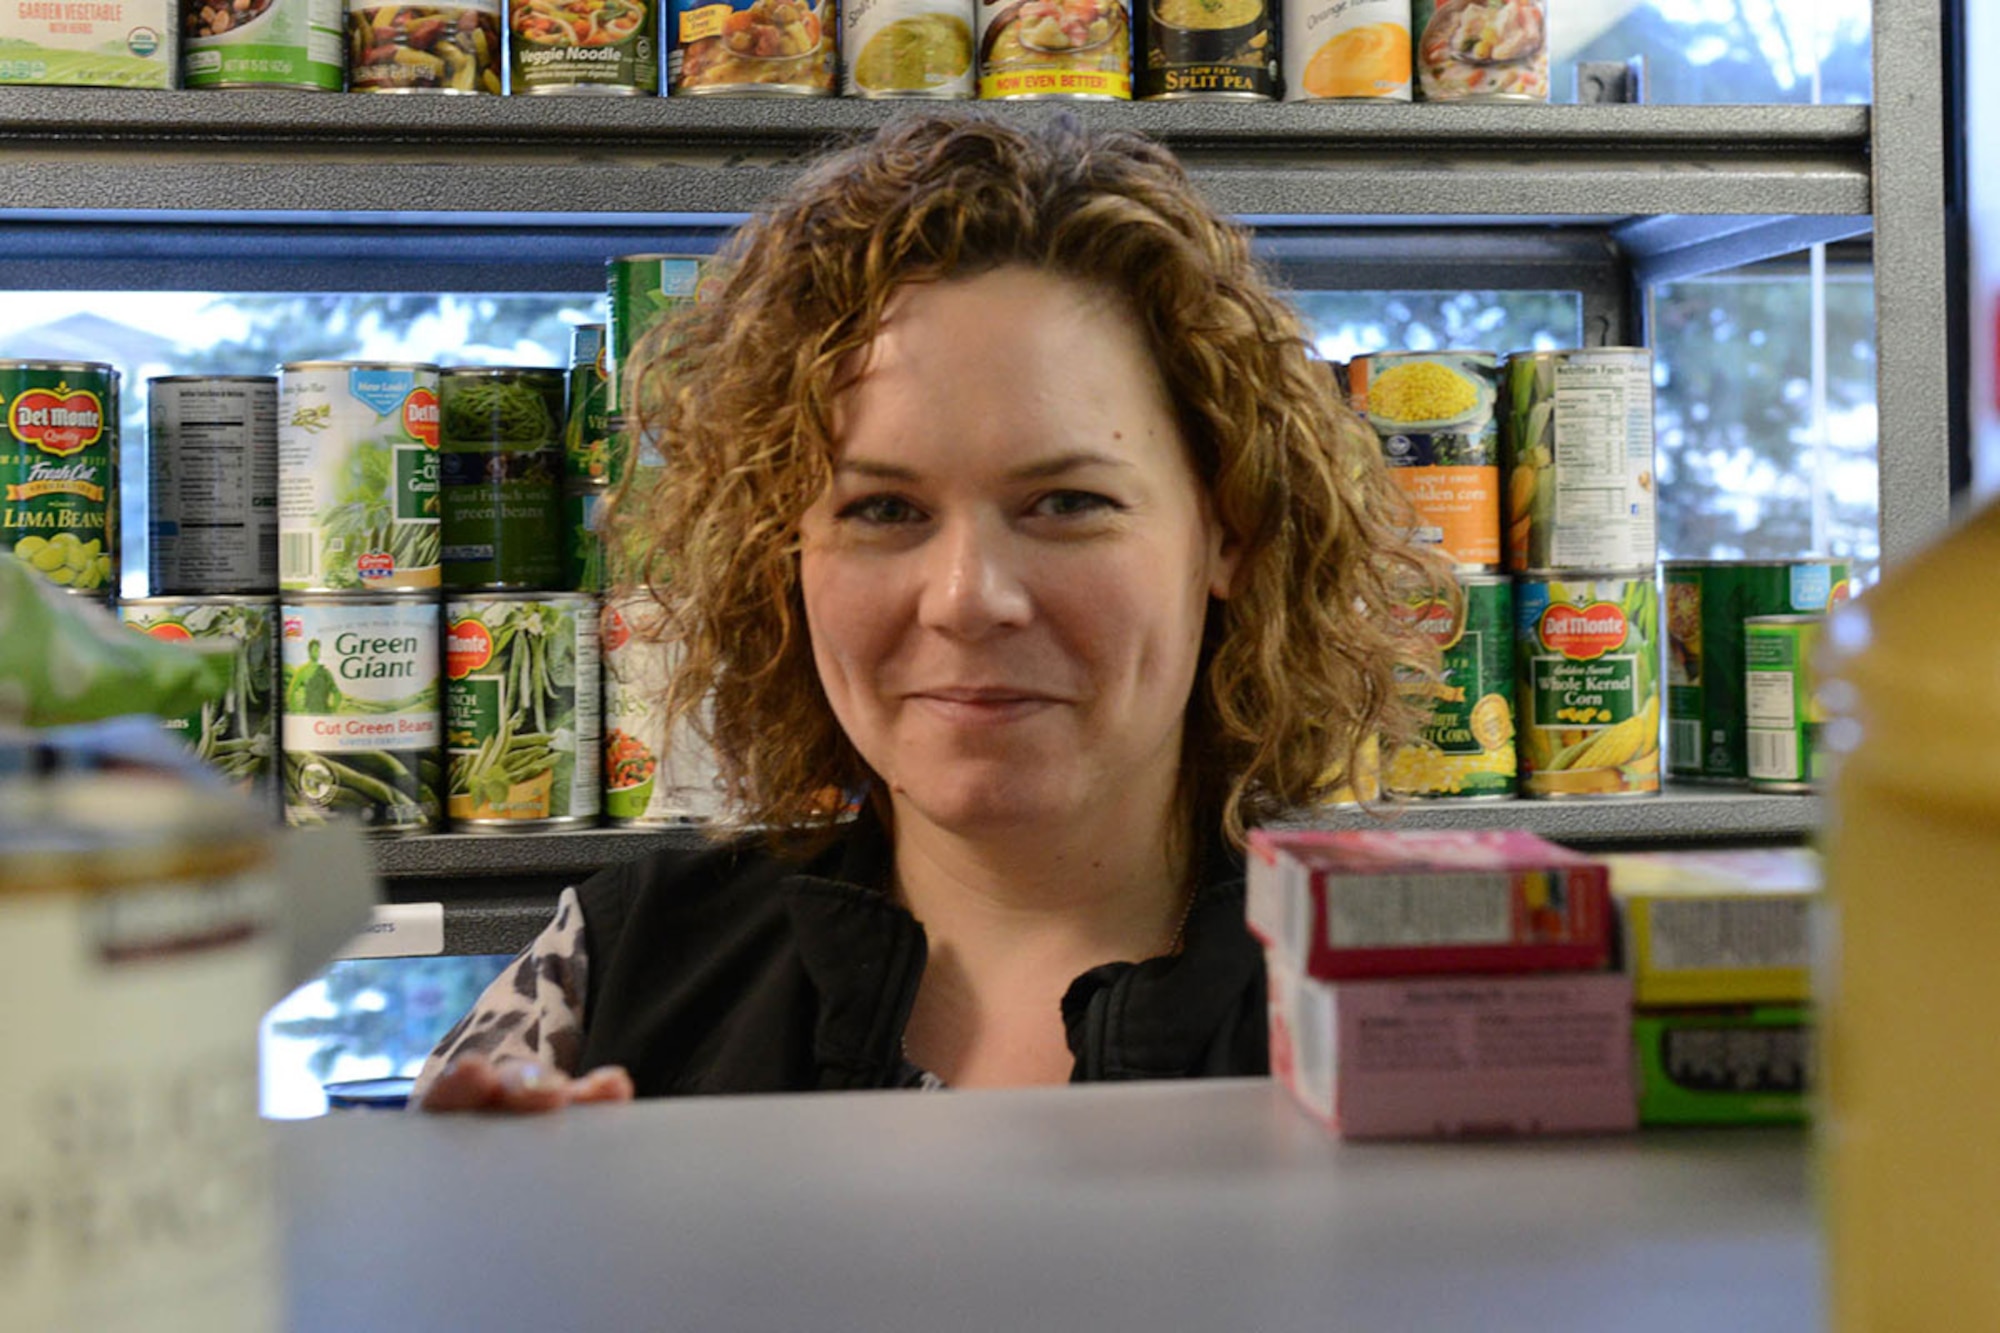 Lita McClain, marketing and public relations specialist for the Armed Services YMCA of Alaska, stocks available shelf space at the ASYMCA food pantry on Joint Base Elmendorf-Richardson, Alaska, Jan. 26, 2016. The food pantry is one of more than 20 programs offered by the ASYMCA, specifically designed to meet the needs of the JBER community. (U.S. Air Force photo by Airman 1st Class Javier Alvarez)

